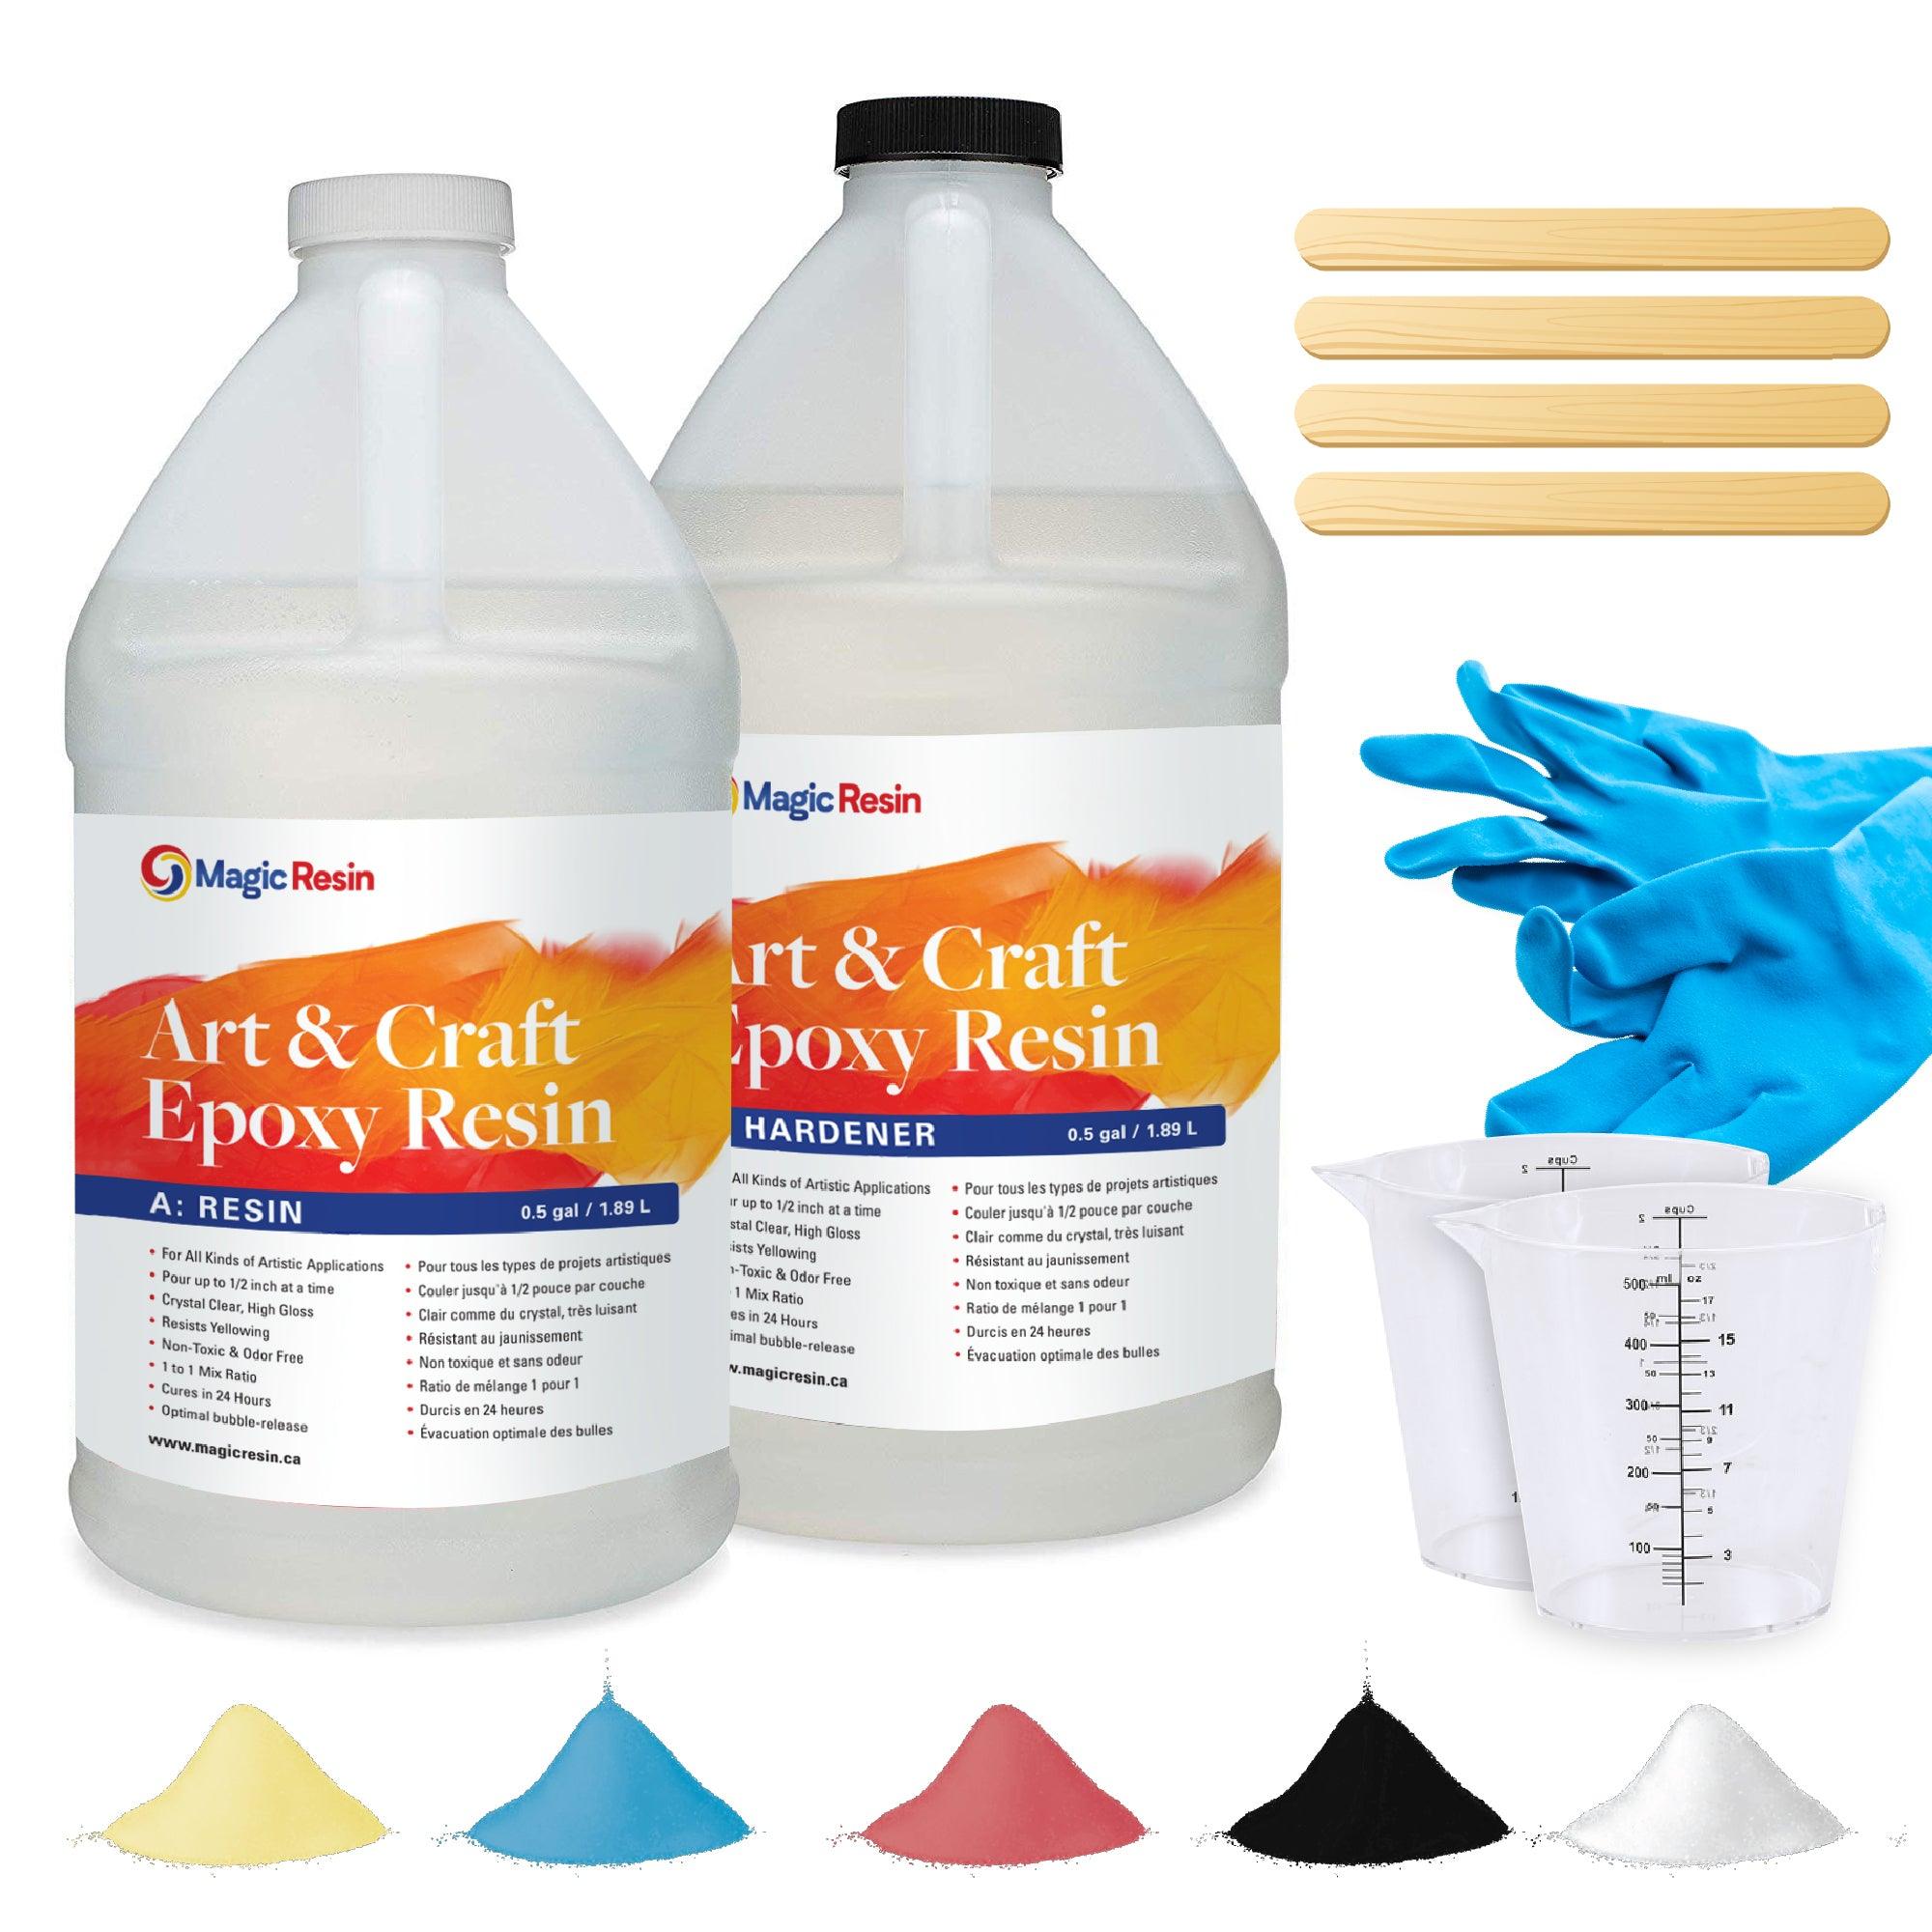 The Epoxy Resin Store - Clear Epoxy Resin, Easy Mixing (1-1), Tabletops,  Coasters, Jewelry, Concrete, Art, Crafts, 2 Part Epoxy - 1 Gallon Kit:  : Industrial & Scientific